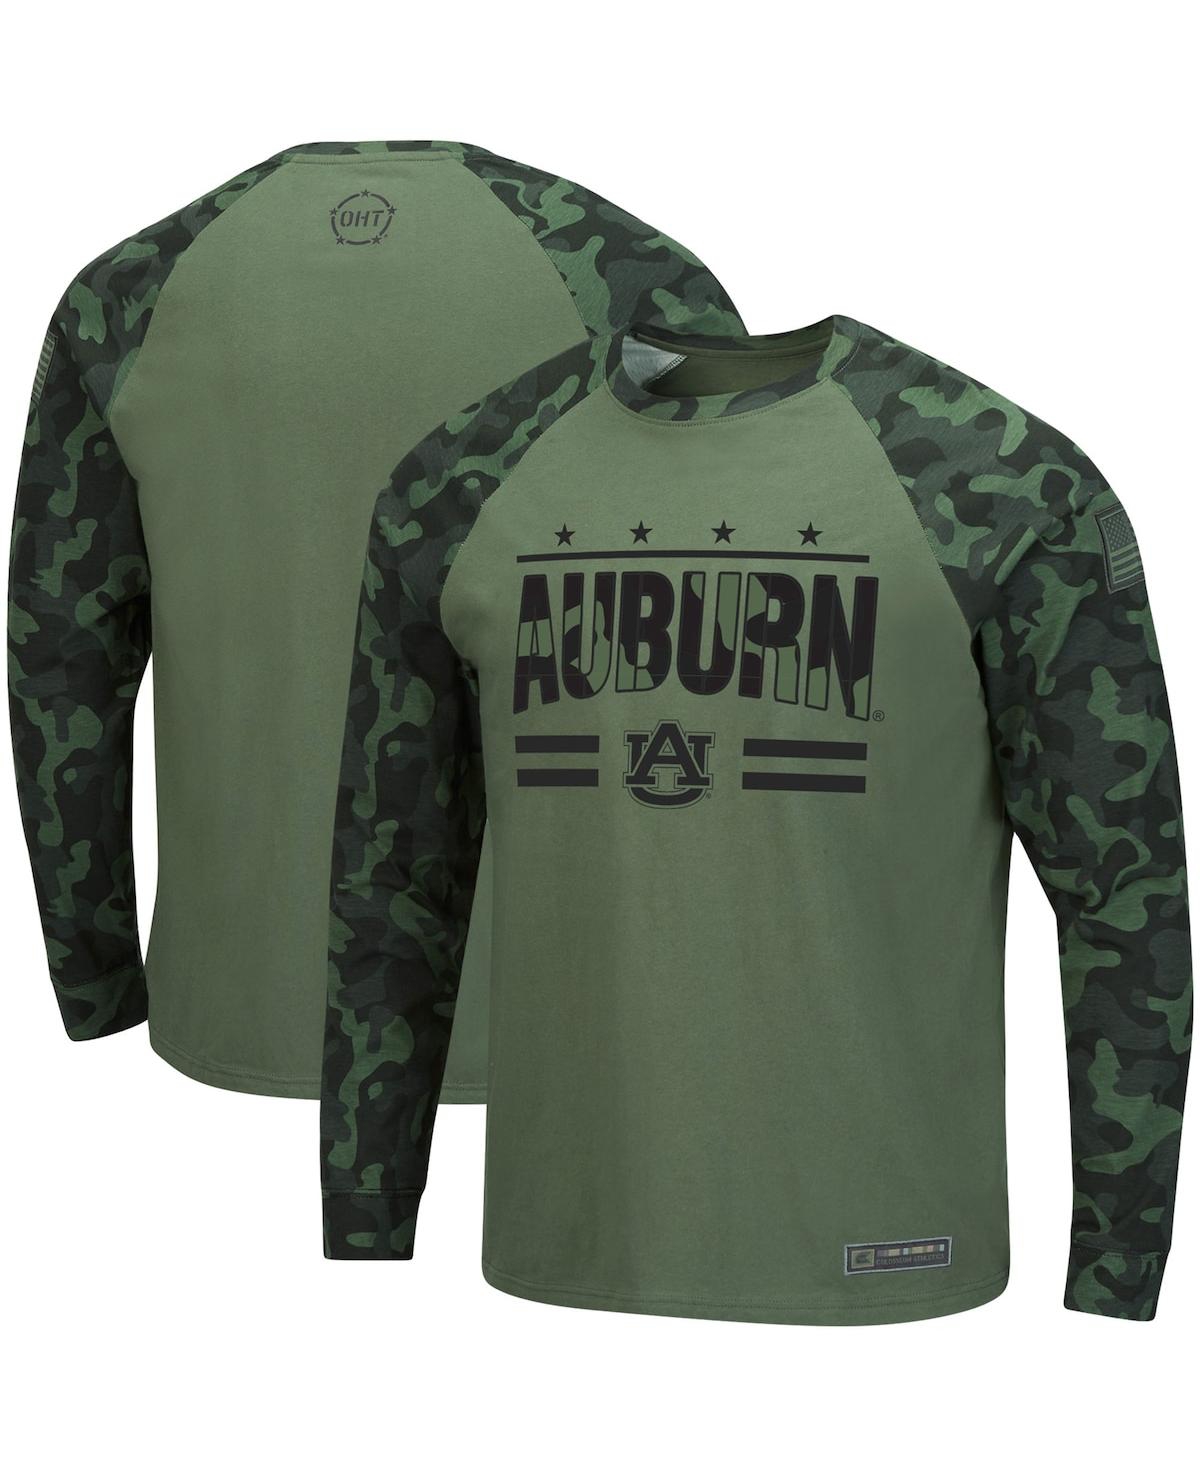 Men's Colosseum Olive and Camo Auburn Tigers Oht Military-Inspired Appreciation Raglan Long Sleeve T-shirt - Olive, Camo